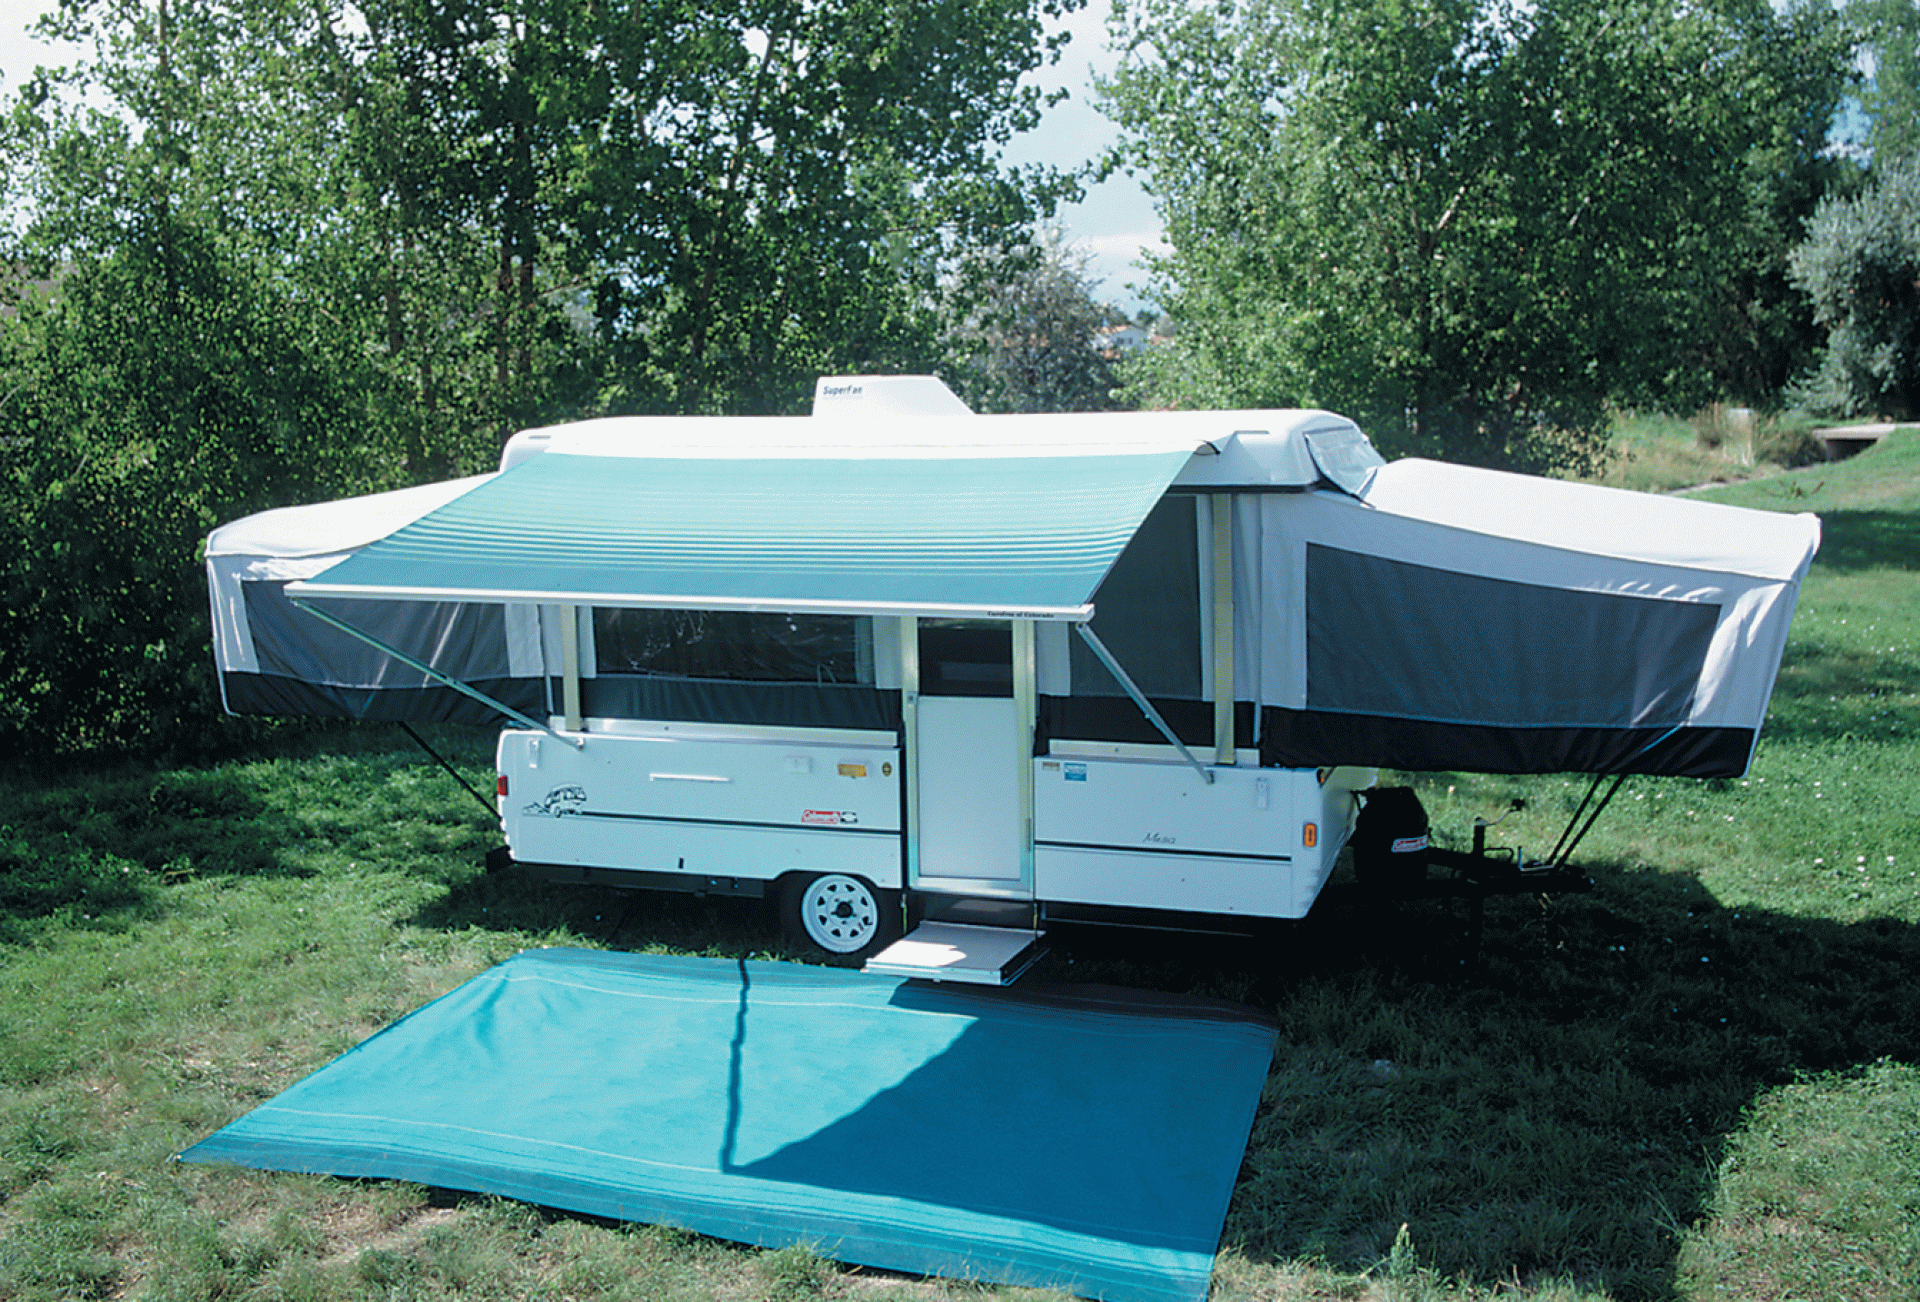 CAREFREE OF COLORADO | 981575700 | Campout Awning 4.0 Metric 13' 1" Teal With White Bag